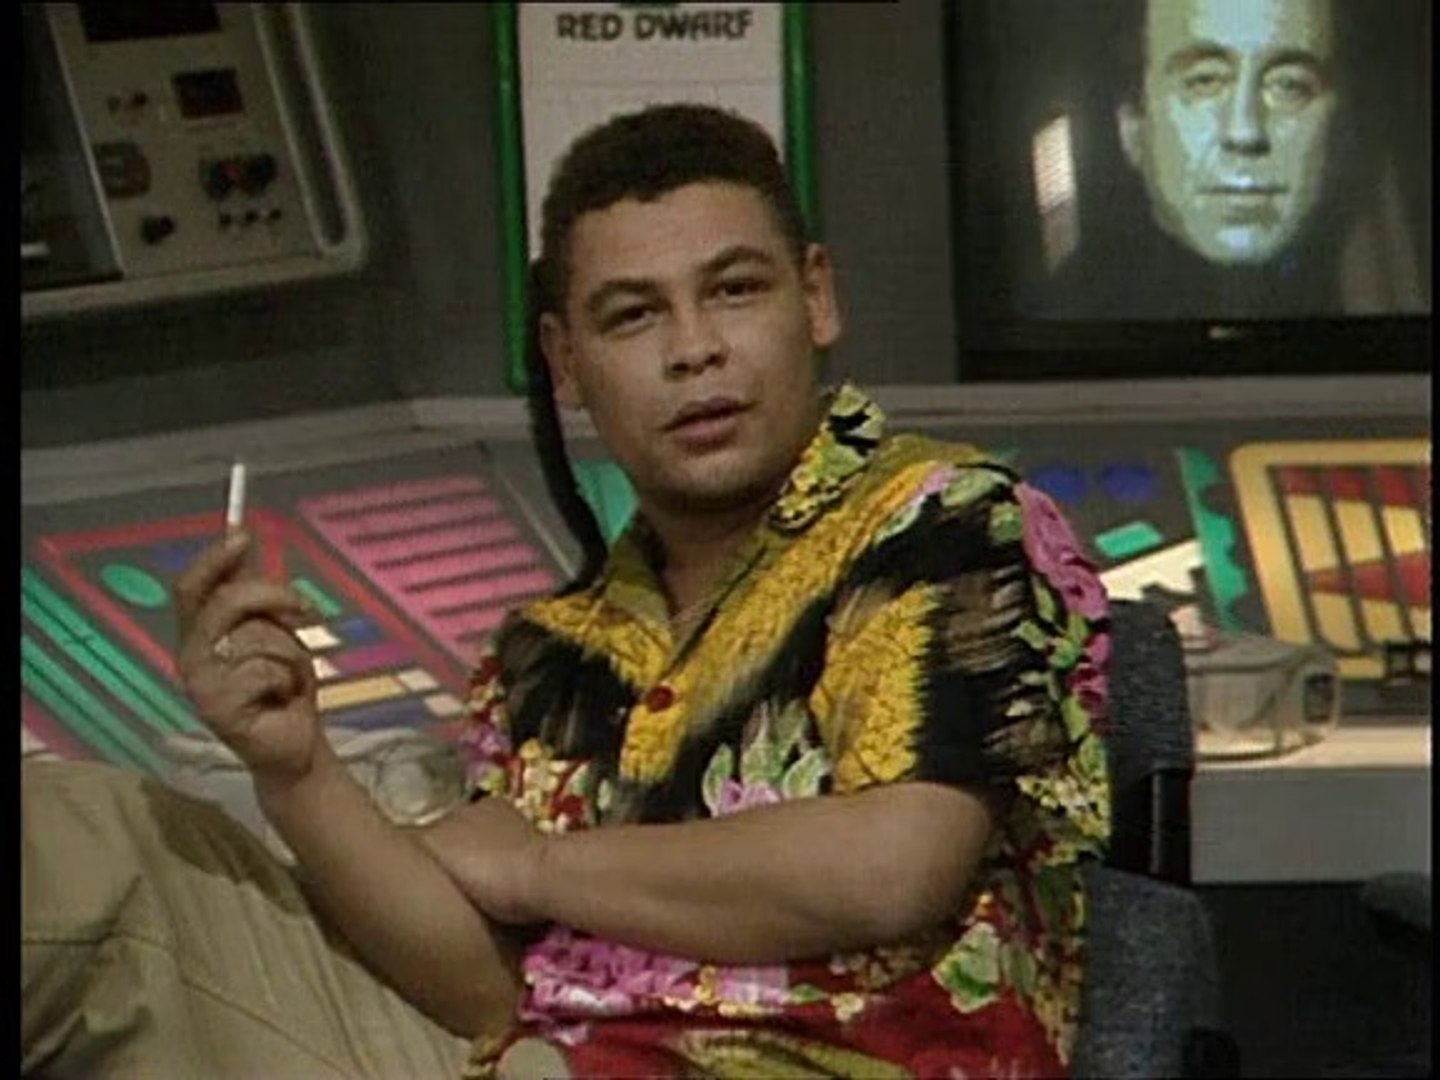 Red Dwarf - S01E01: The End - video Dailymotion